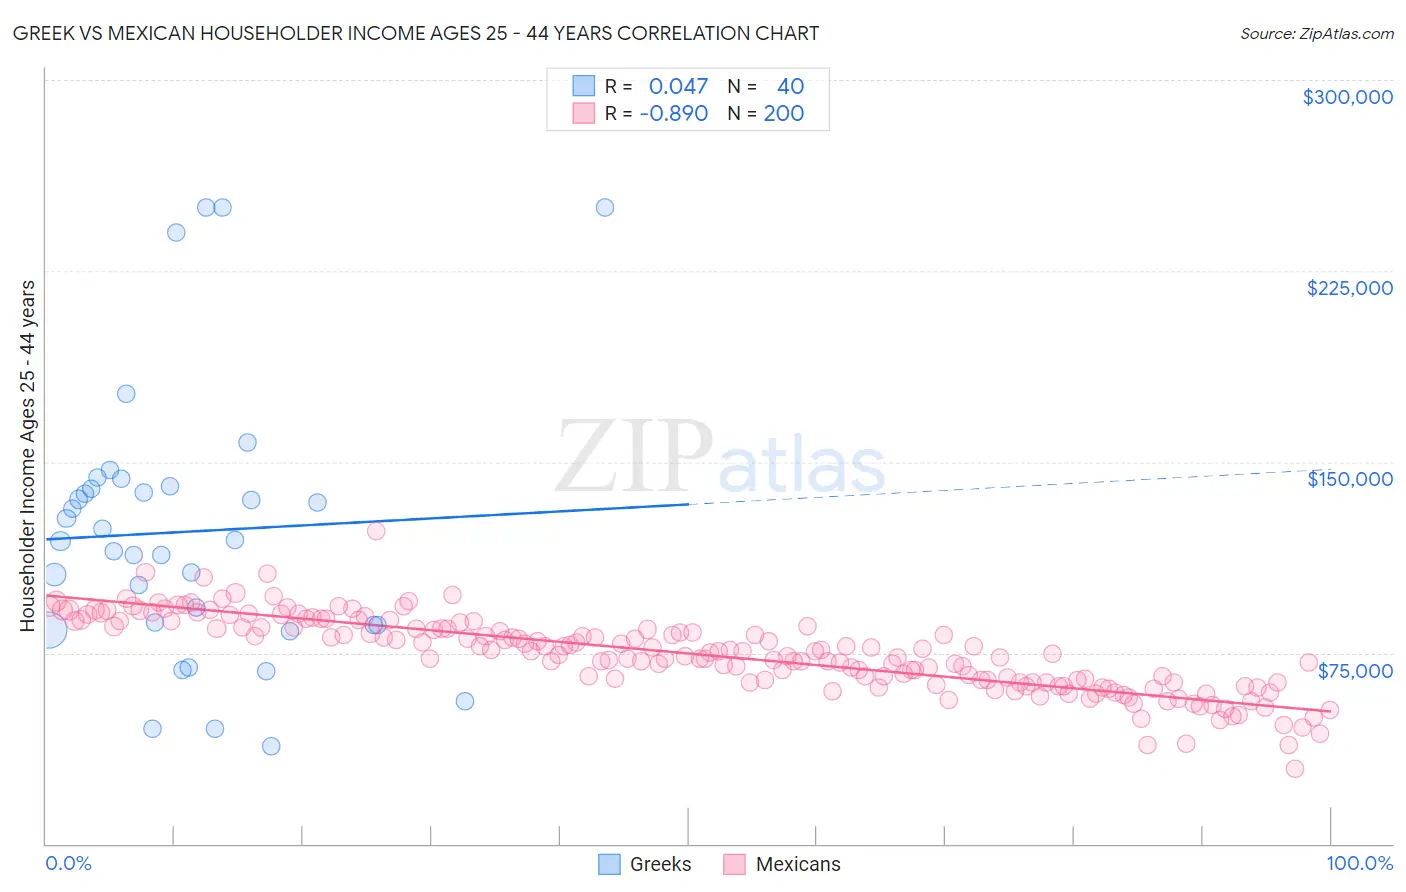 Greek vs Mexican Householder Income Ages 25 - 44 years